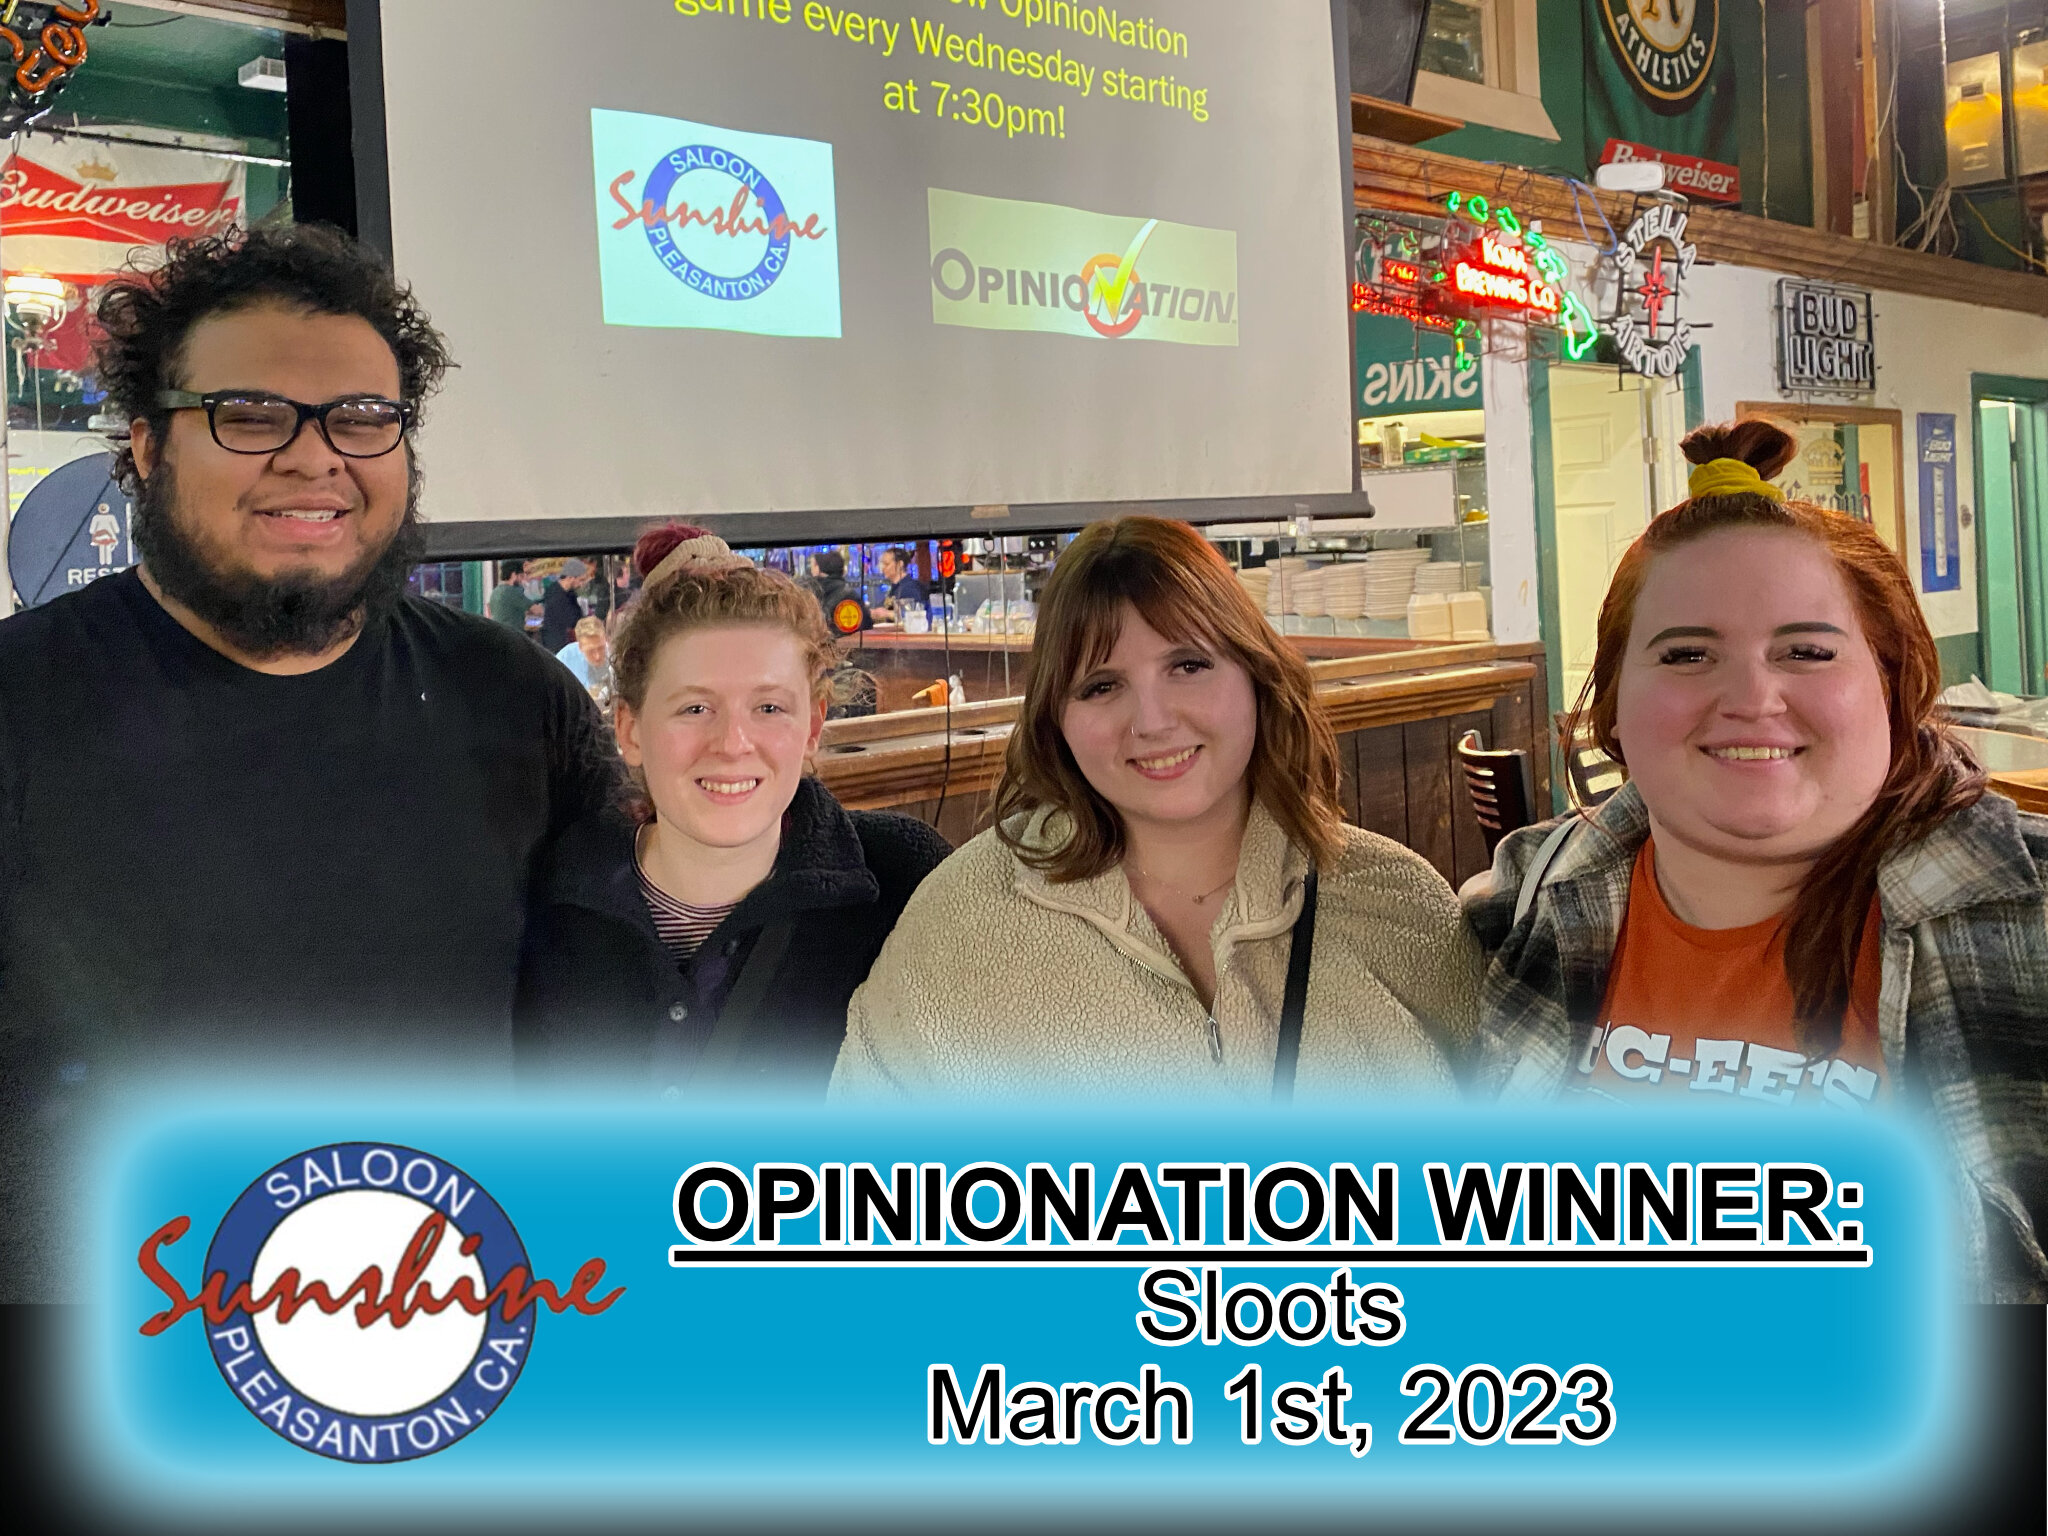 Here's hoping you made it through April Fools without egg on your face! If you need to get your smart bona-fides back in place come out to Opinionation Wednesdays at Sunshine Saloon for your chance to win!